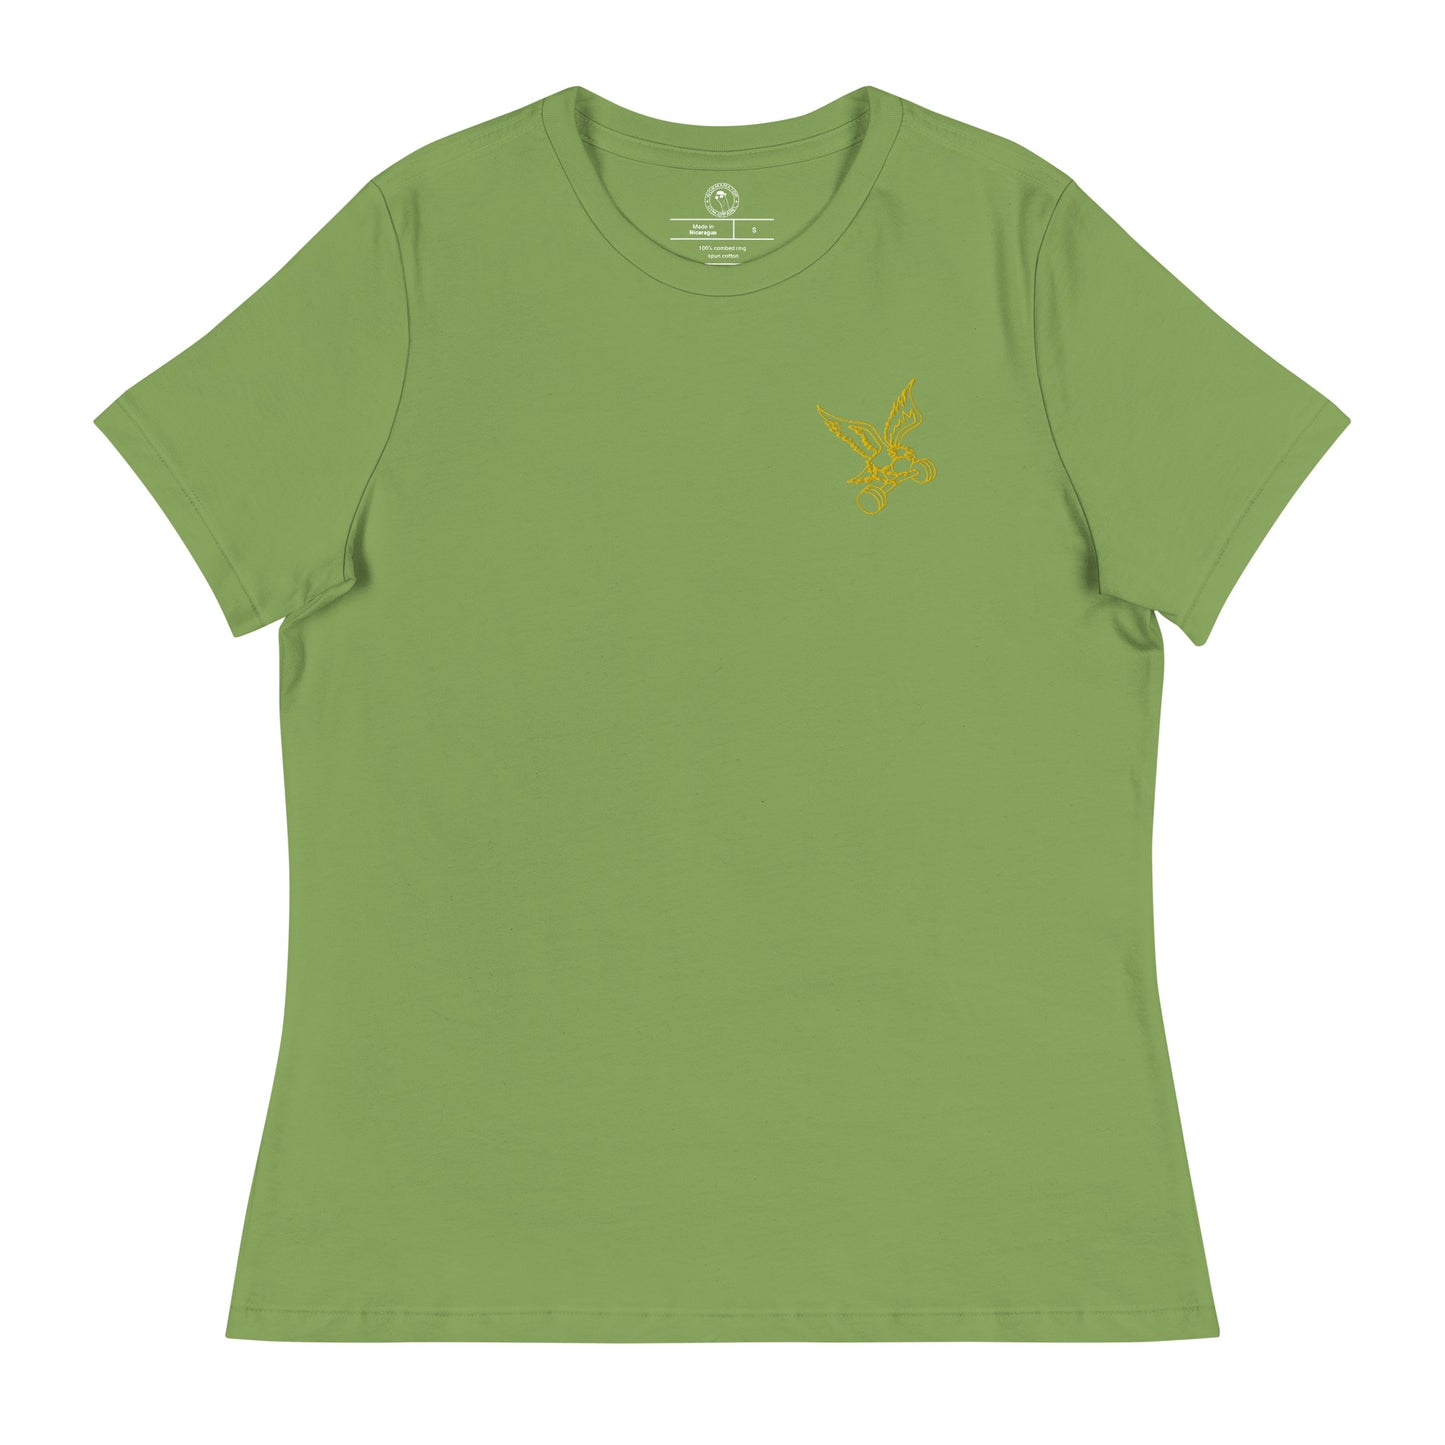 Women's Embroidered Barbell Eagle Shirt in Leaf Green